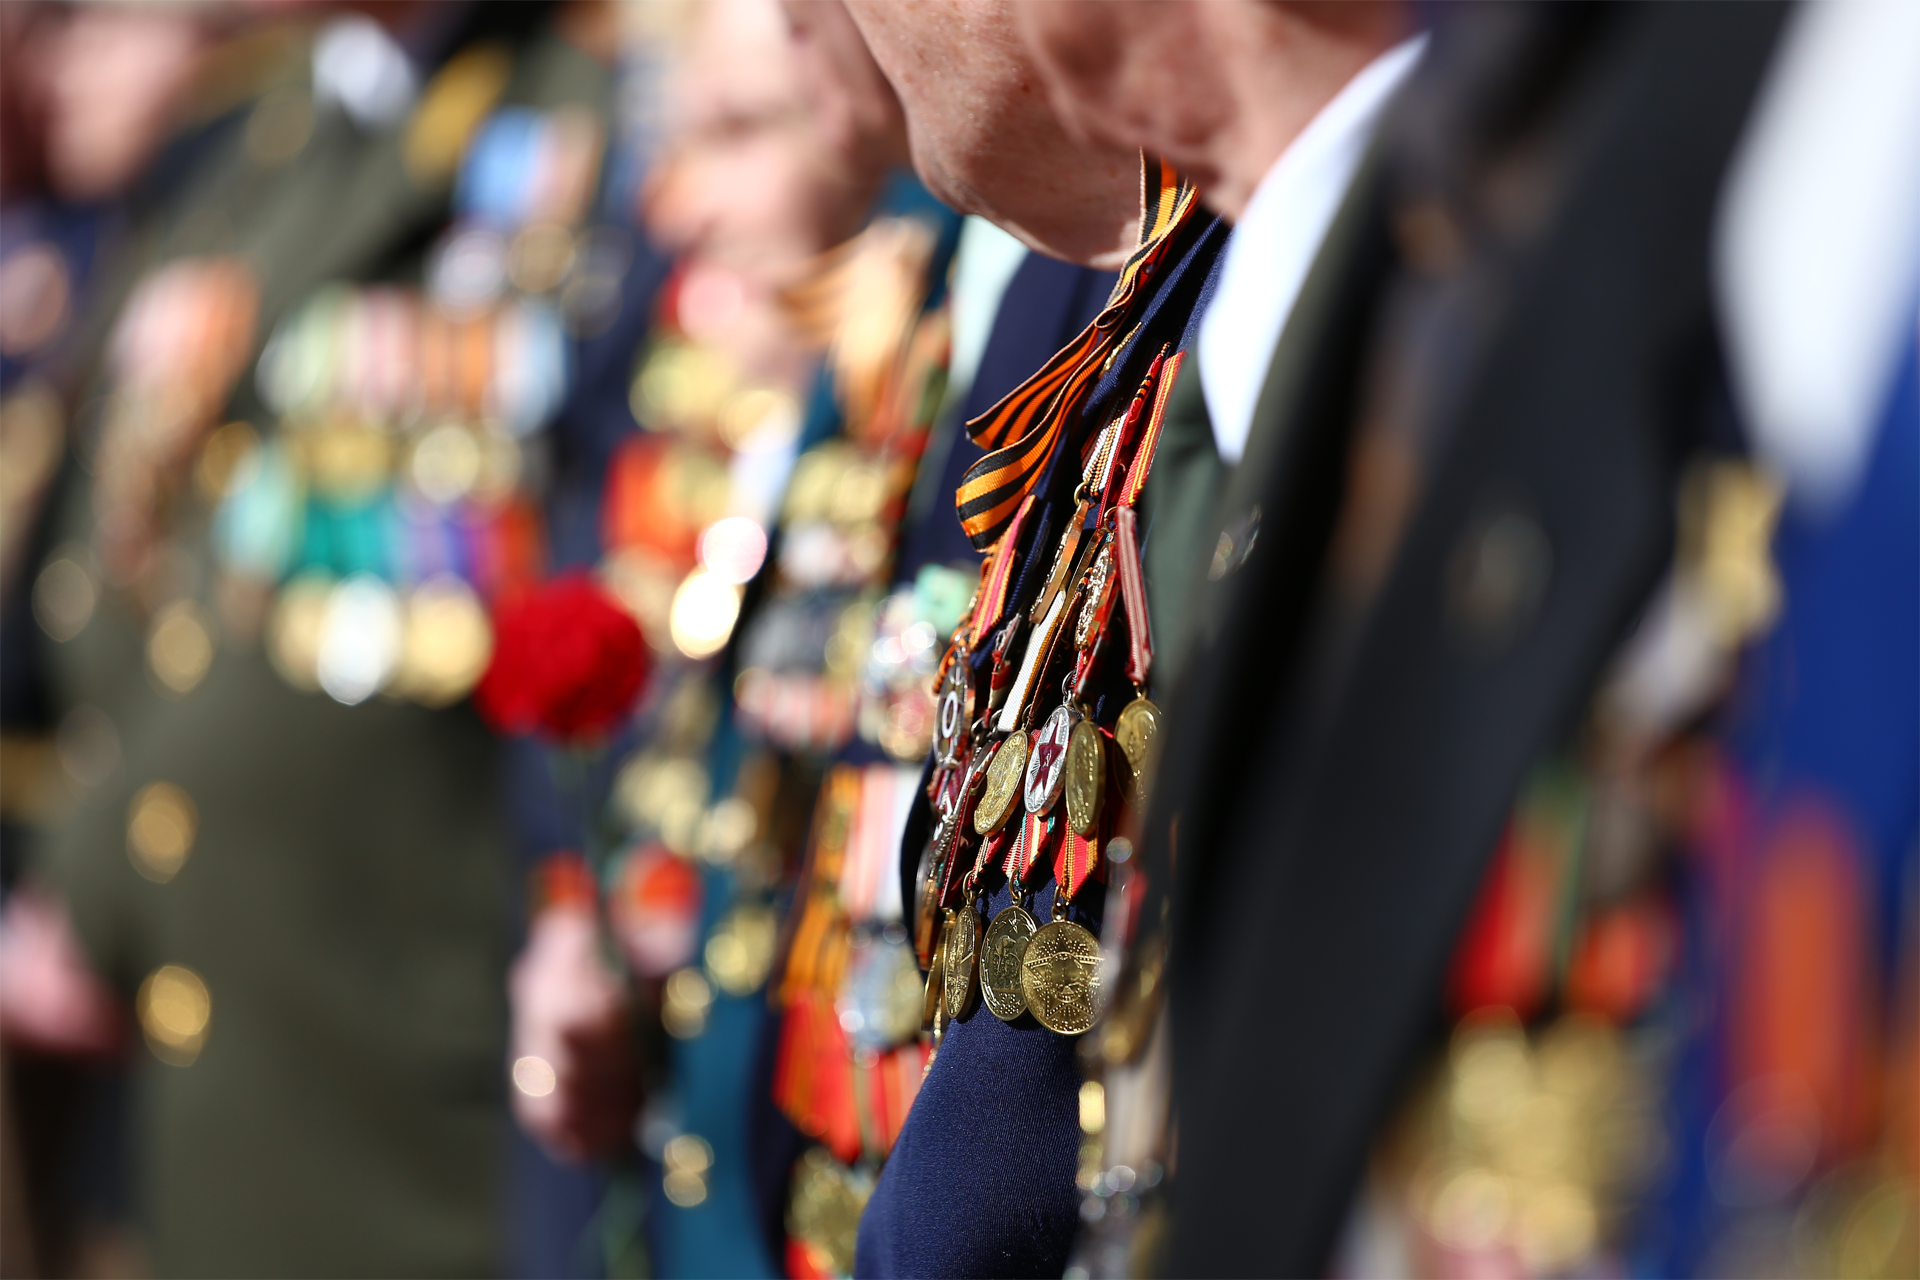 A group of men in military uniforms are standing in a line.